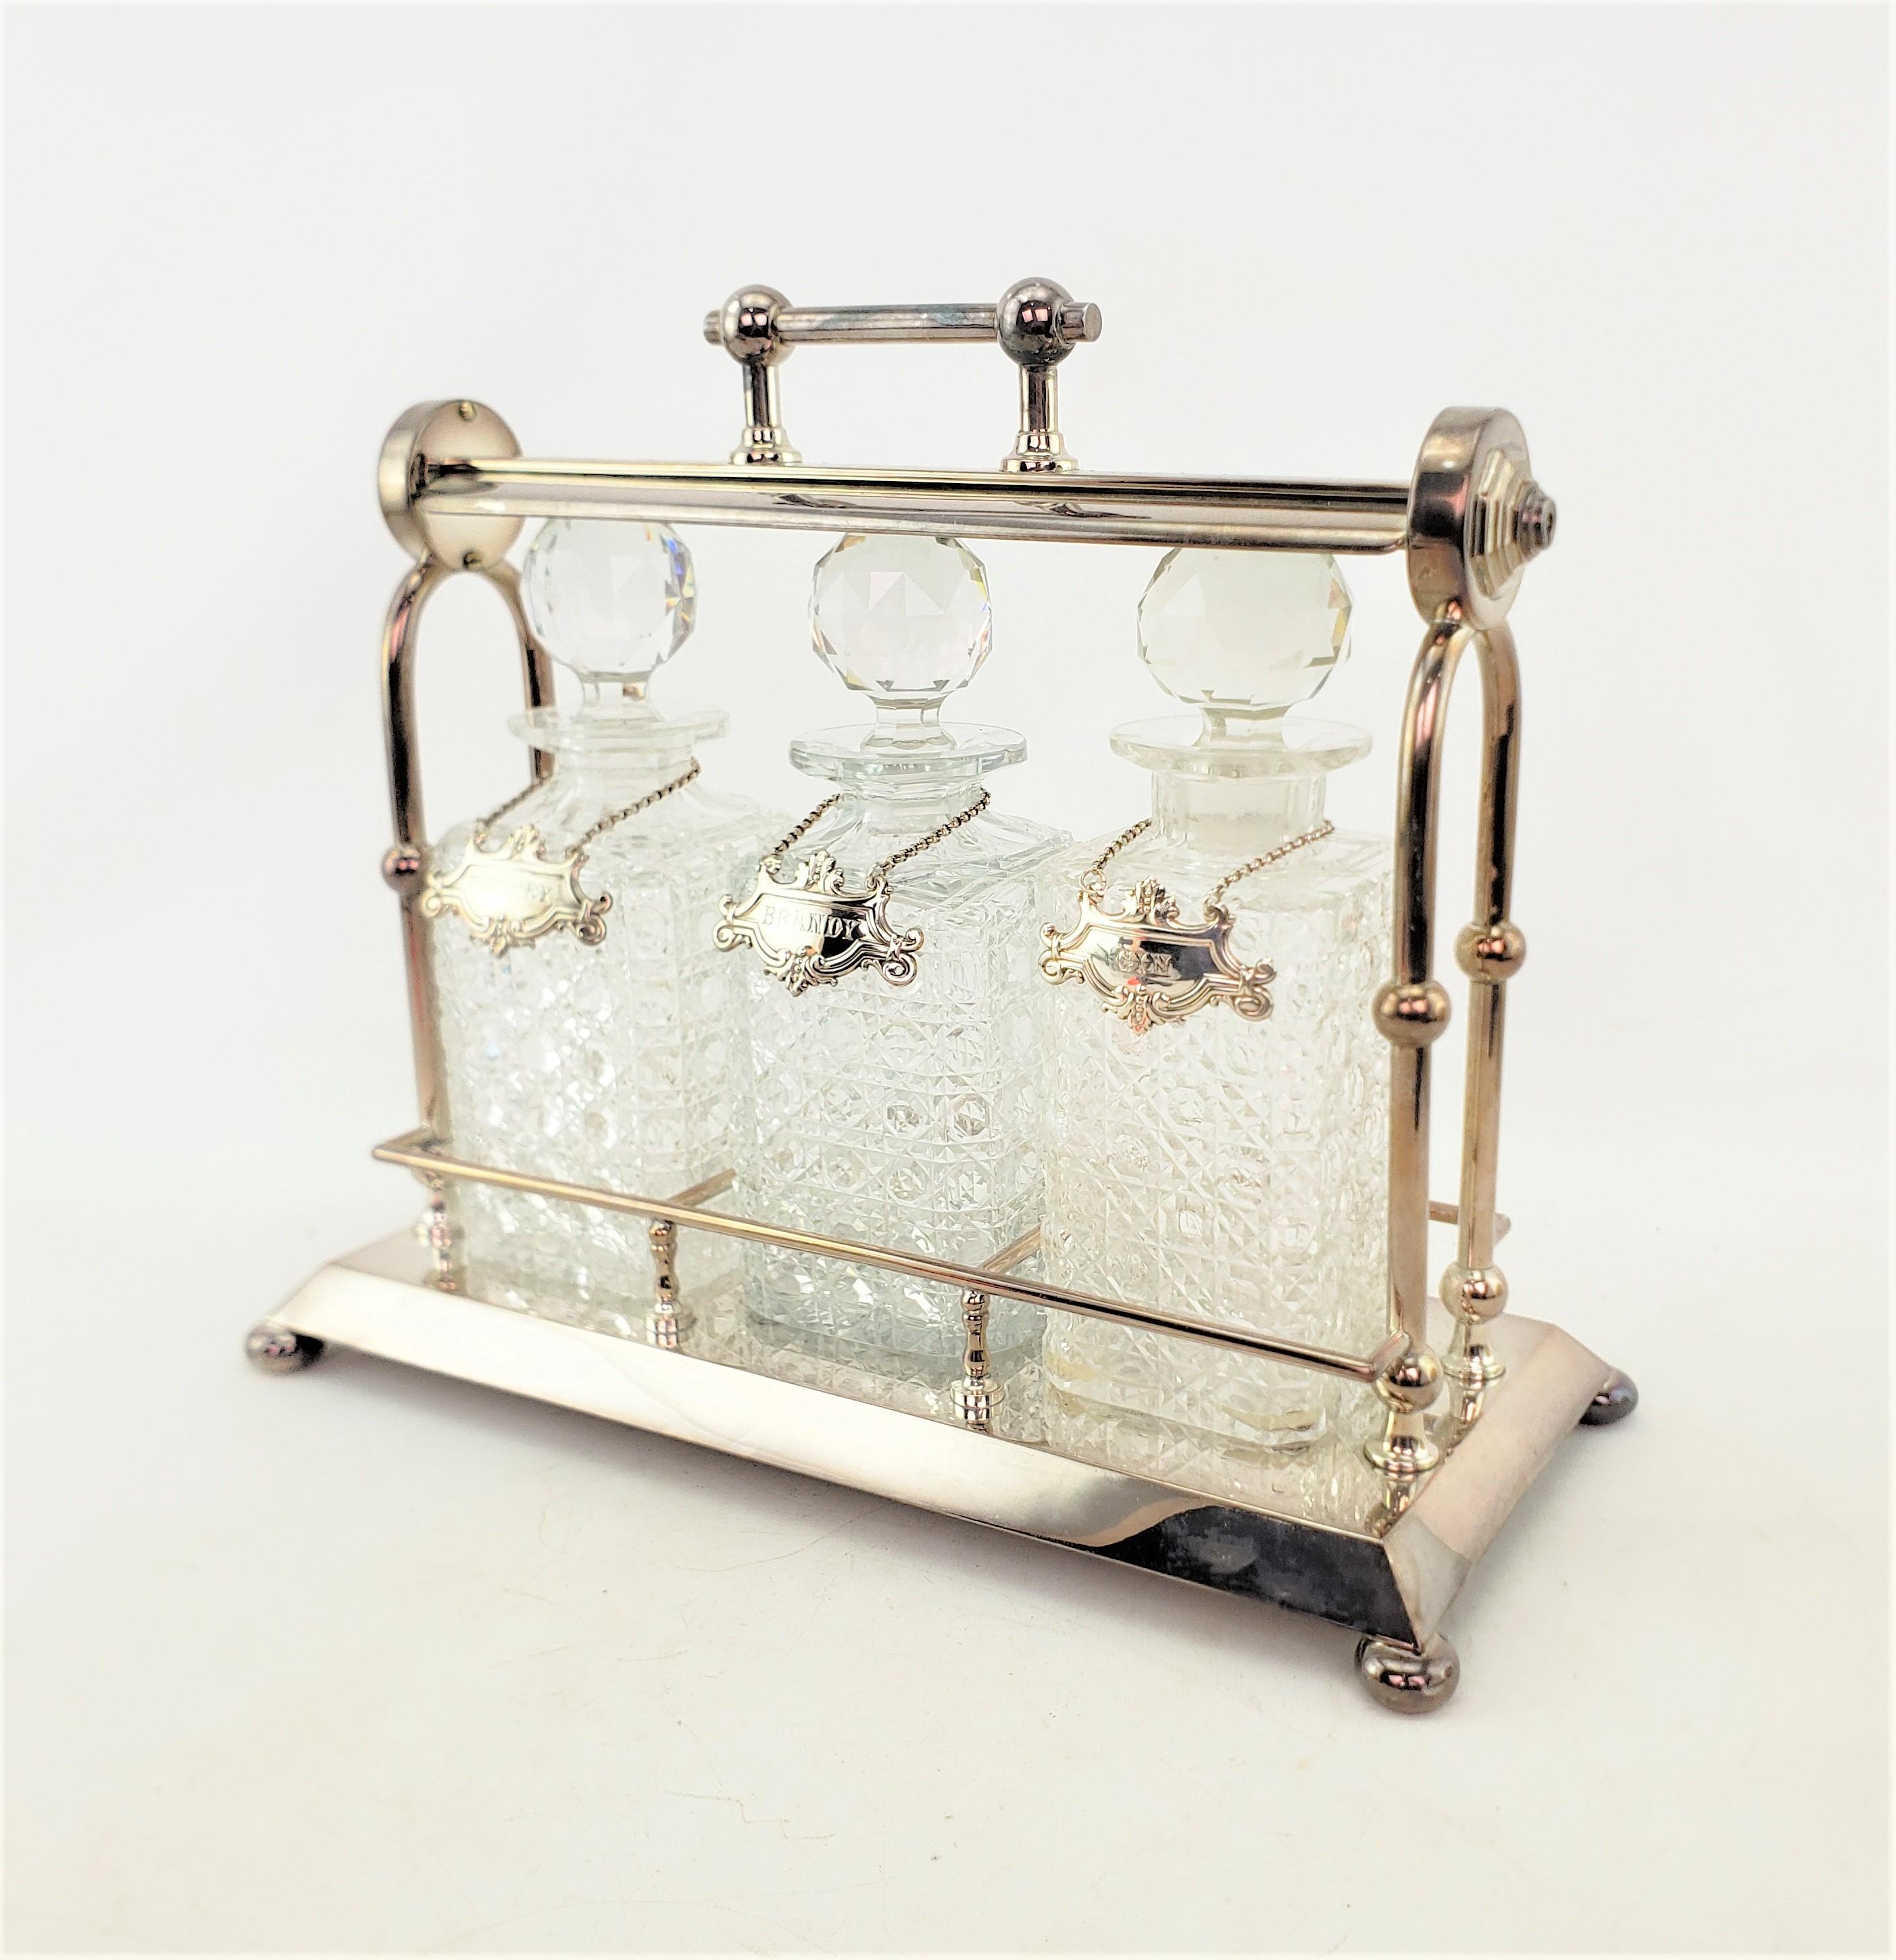 This silver plated three bottle tantalus has no maker's marks, but is presumed to have originated from England and date to approximately 1900 and done in the period Edwardian style. The tantalus is composed of silver plate with a sturdy locking